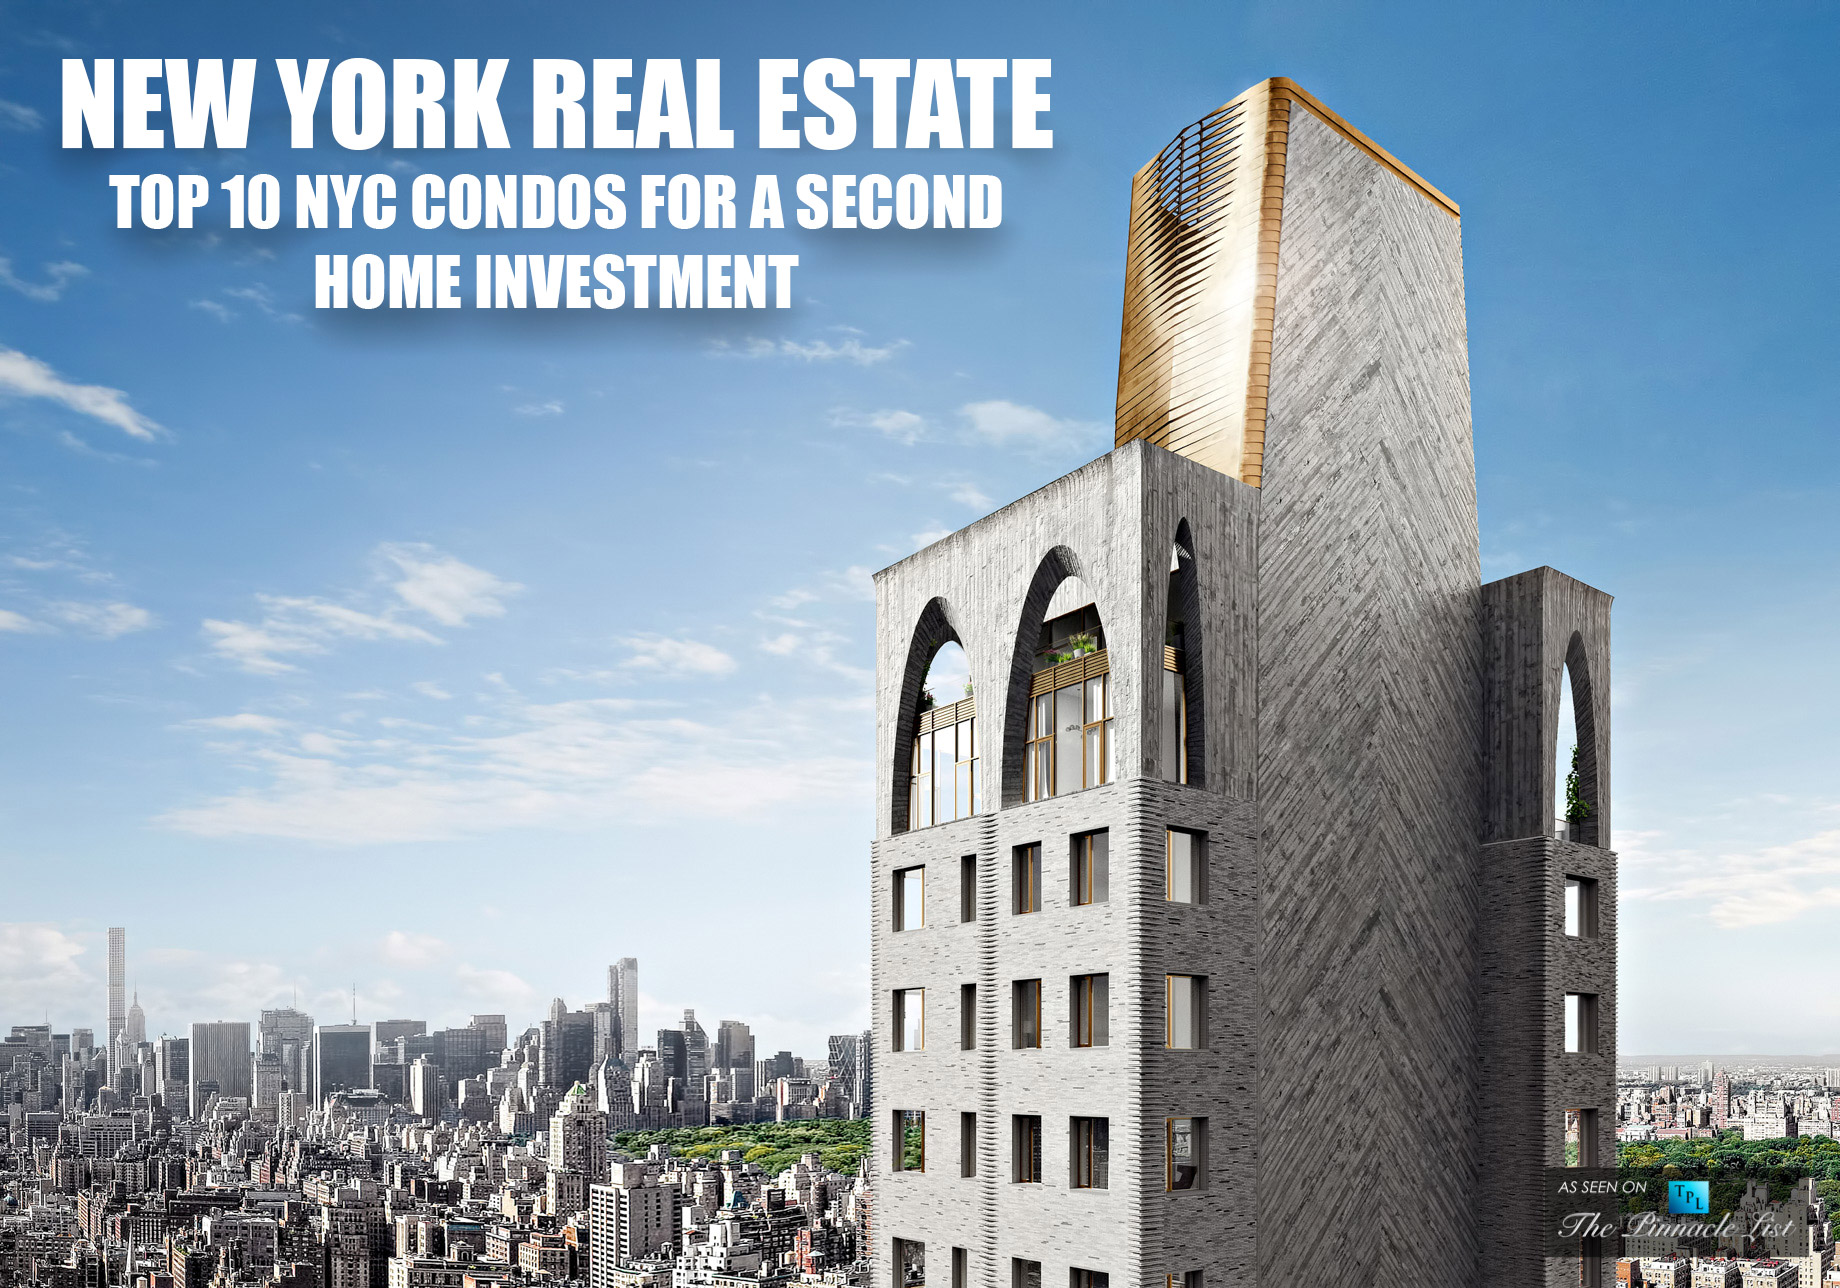 New York Real Estate – Top 10 NYC Condos for a Second Home Investment